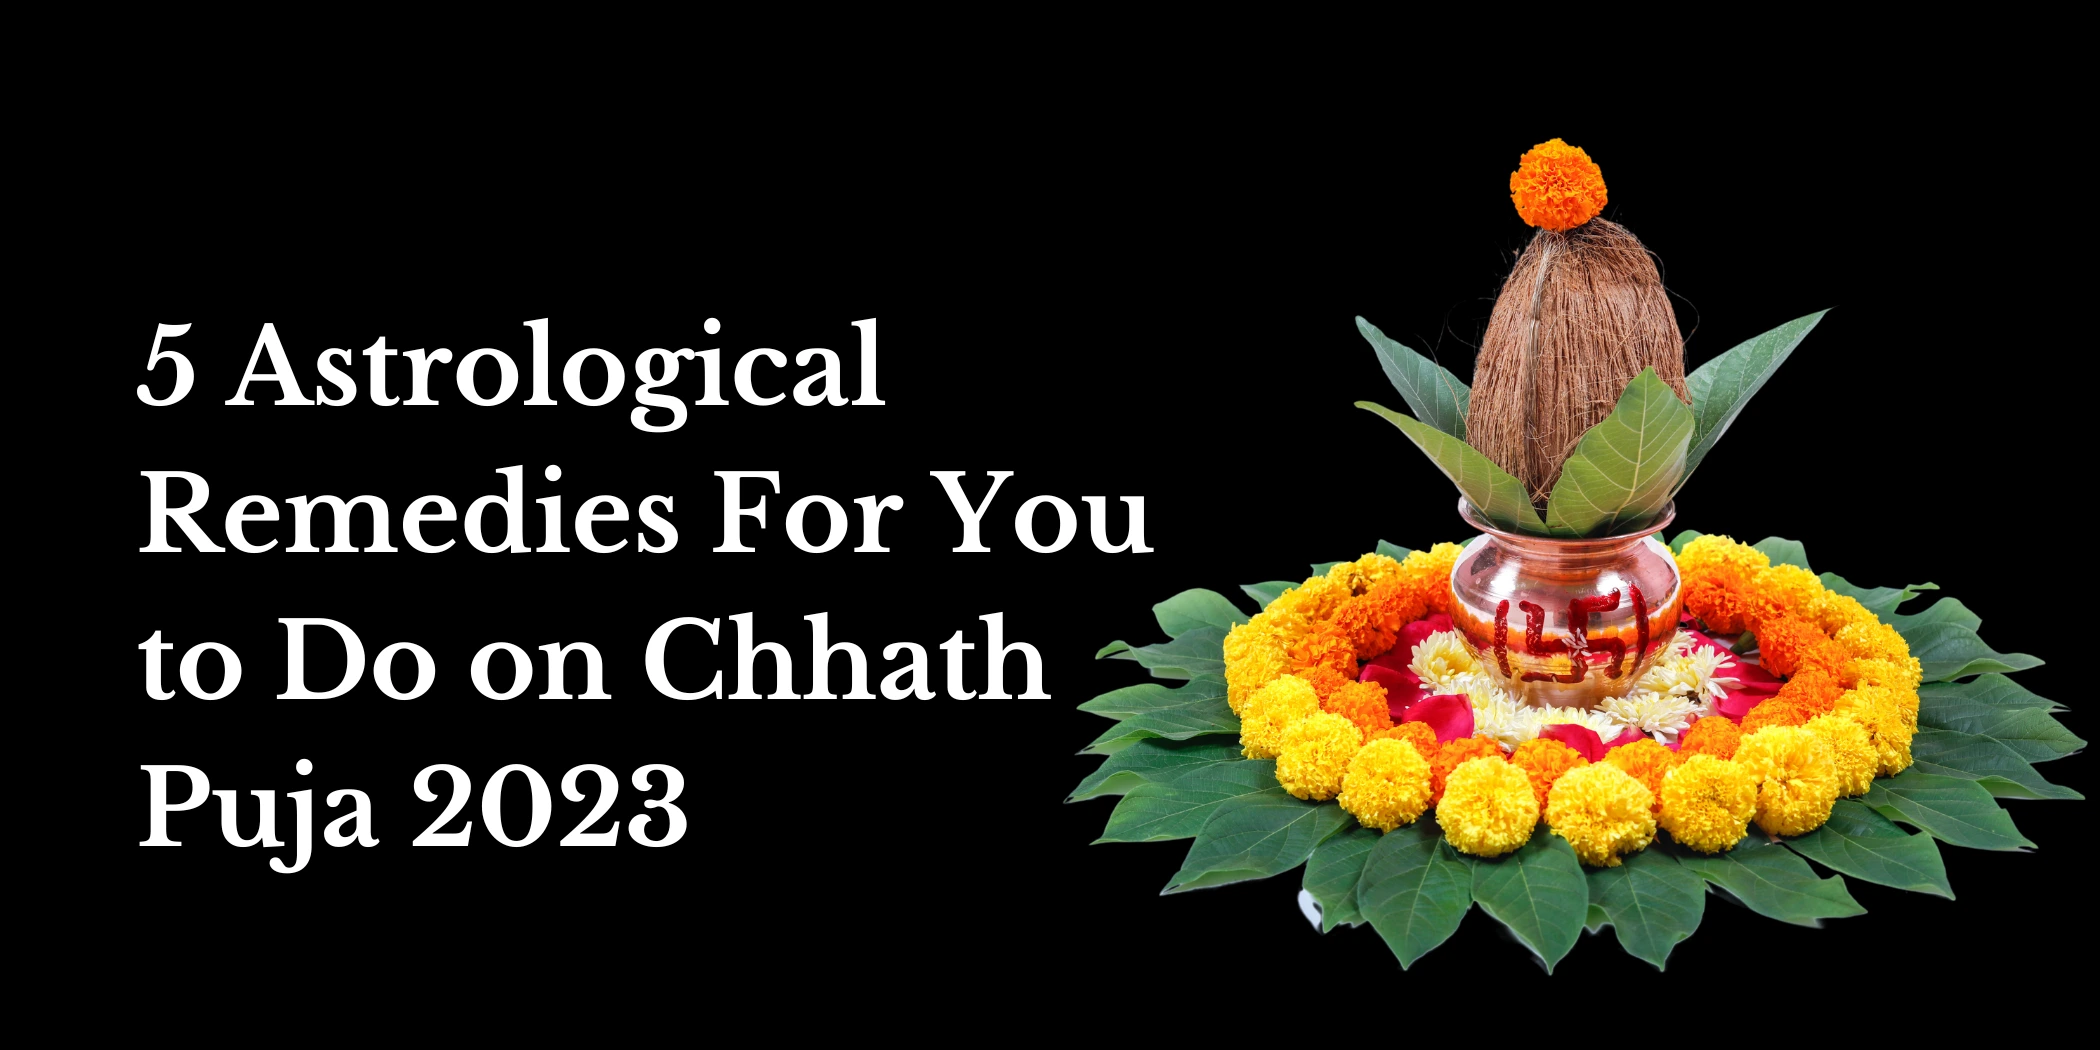 5 Astrological Remedies For You to Do on Chhath Puja 2023